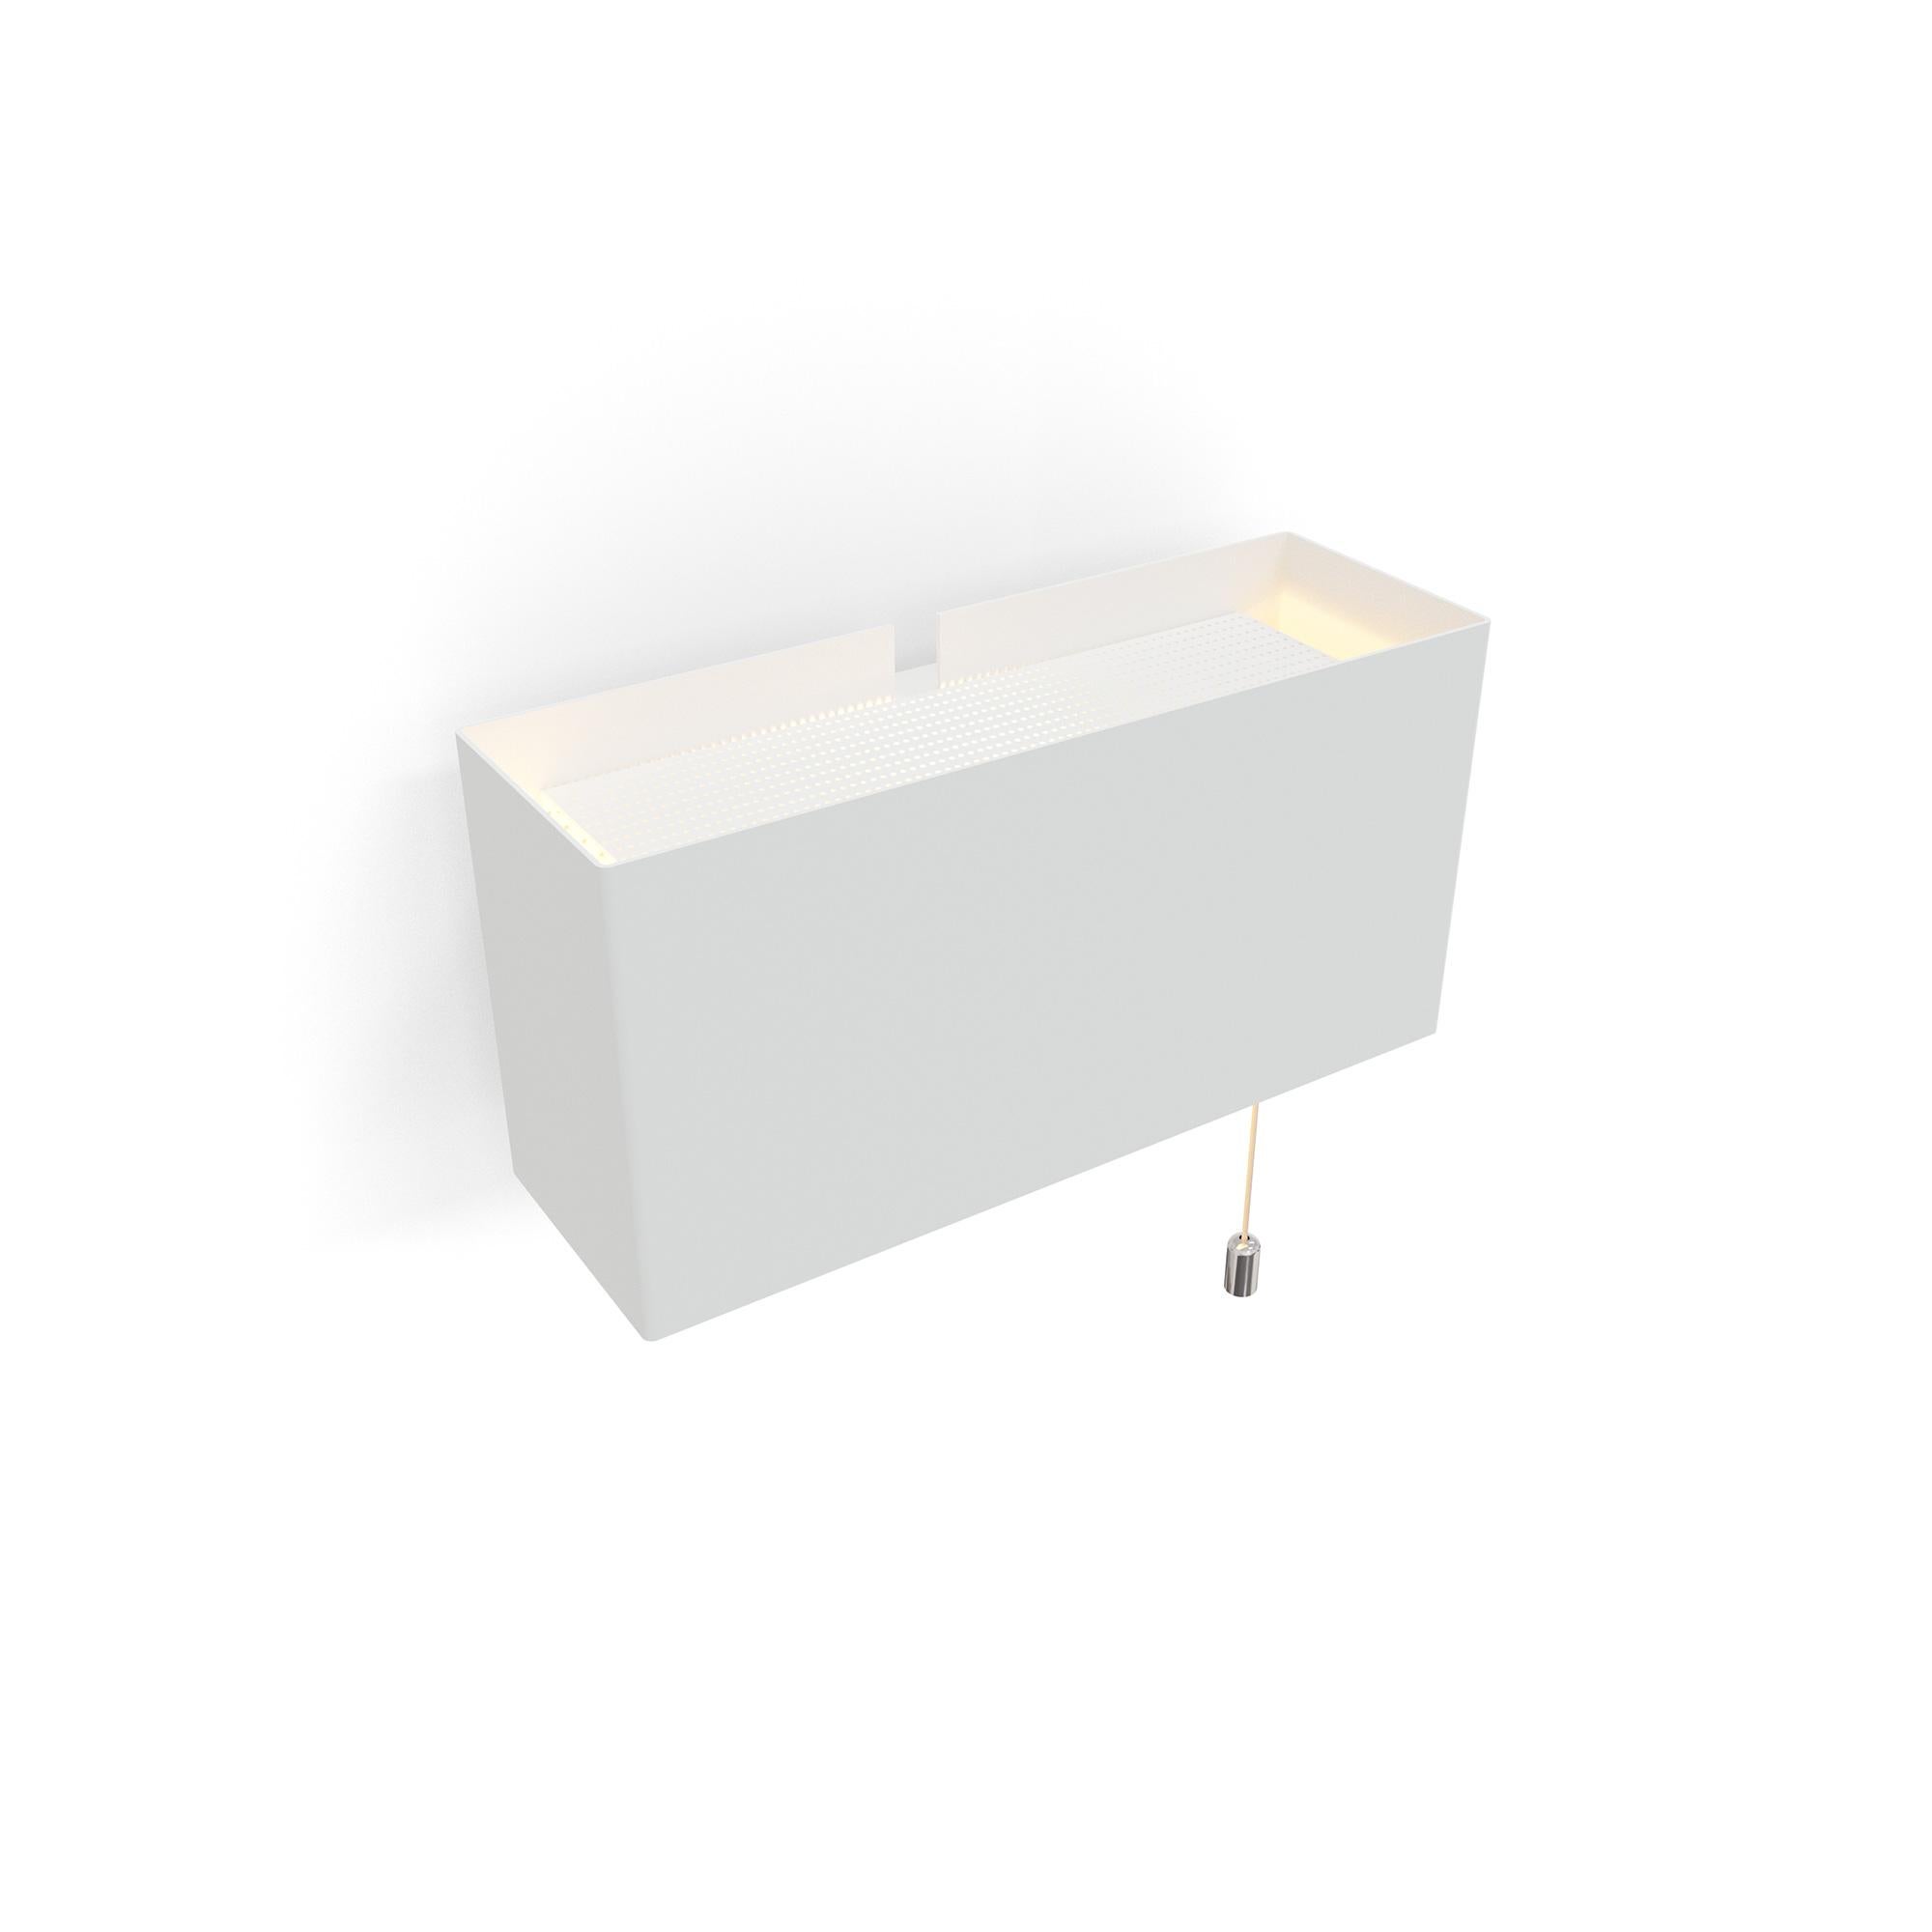 6135PM White With Mini Pull Switch Wall Lamp by Disderot
Limited Edition. 
Designed by Pierre Paulin.
Dimensions: D 7,74 x W 18 x H 9 cm.
Materials: Lacquered metal and chrome.

Delivered with authentication certificate. Made in France. Available in